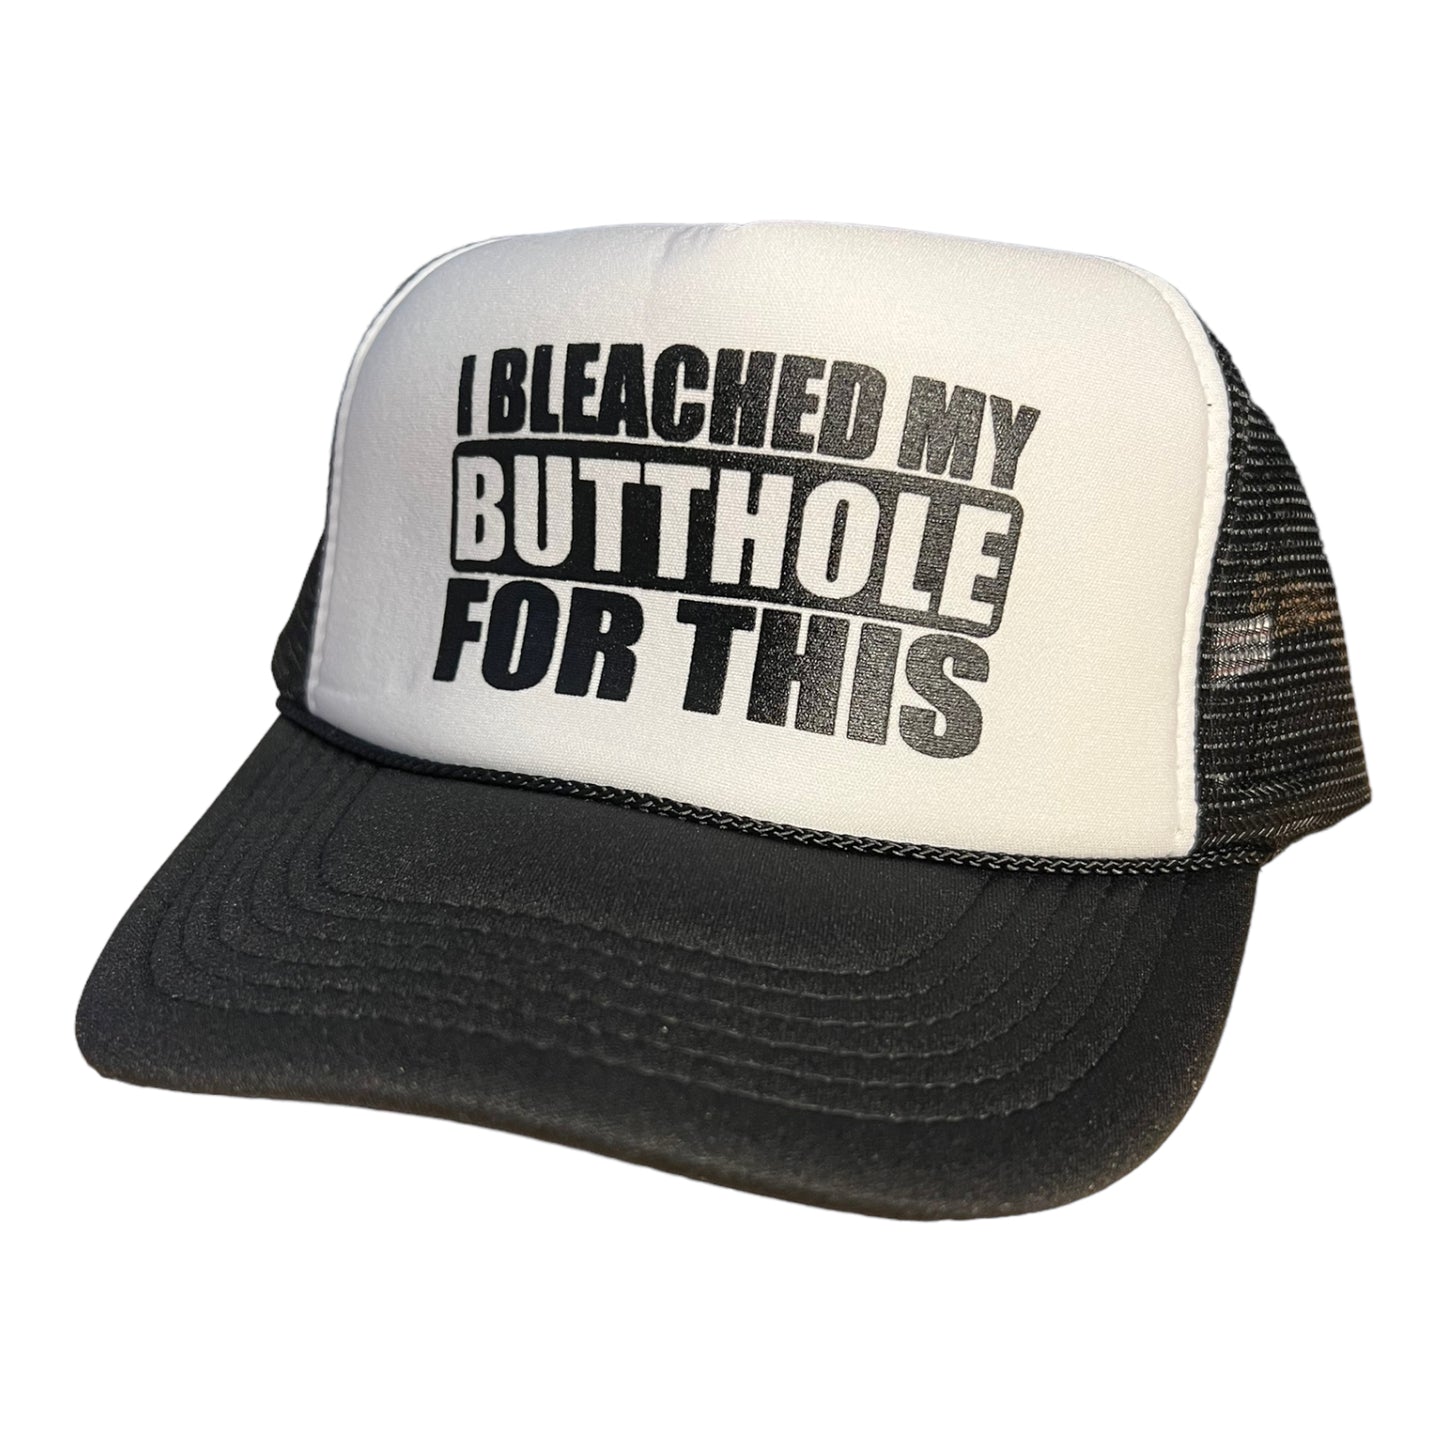 I Bleached My Butthole For This Trucker Hat Funny Trucker Hat Black/White